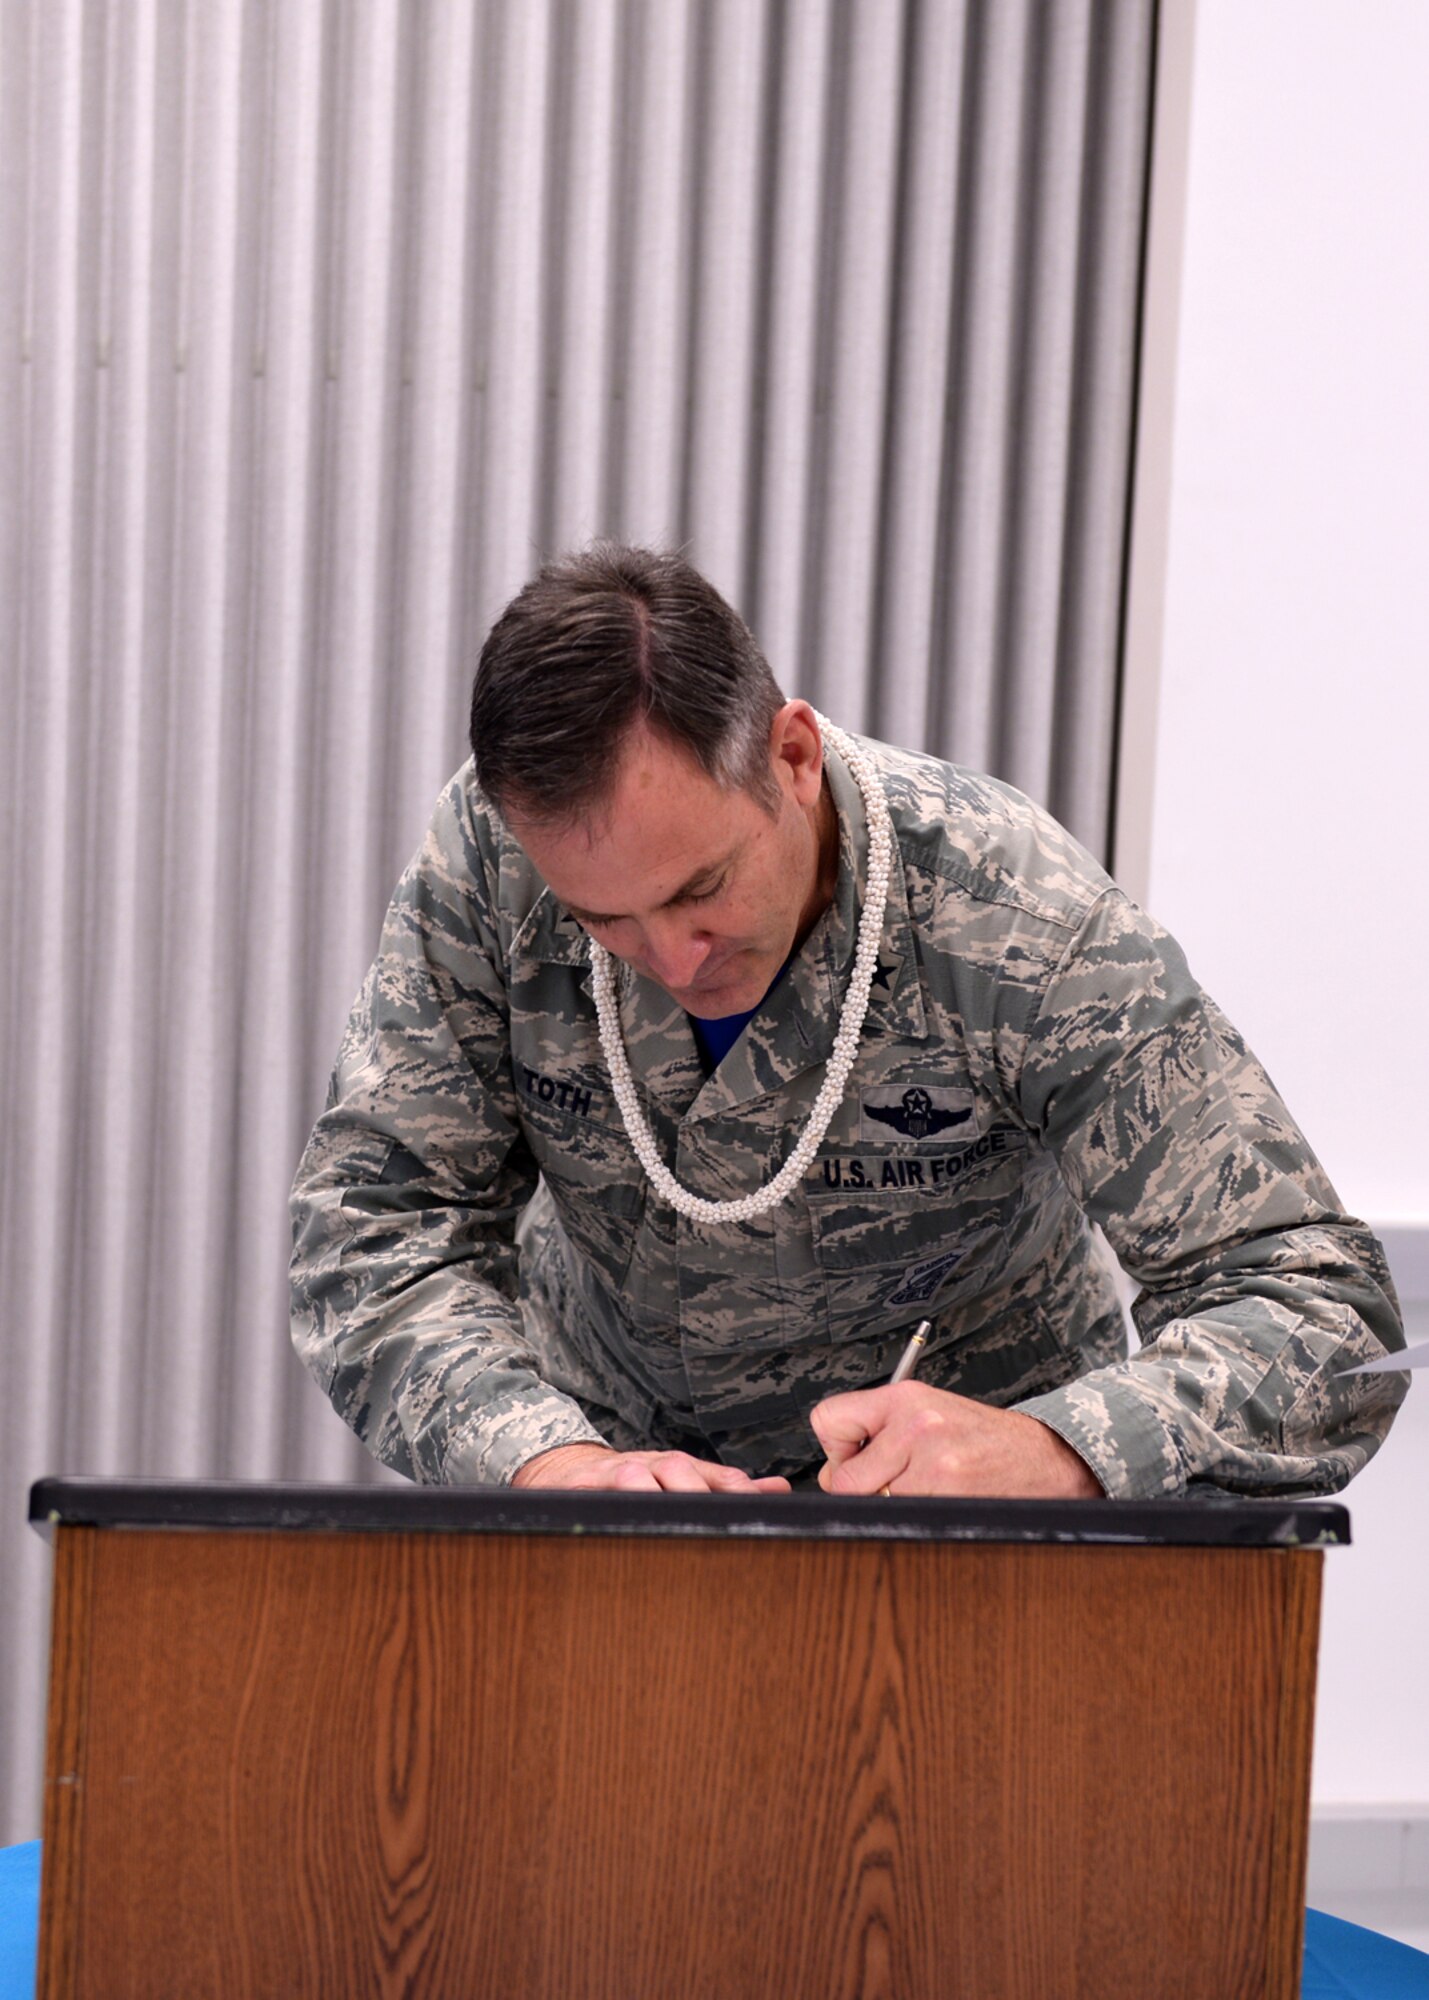 Brig. Gen. Andrew Toth, 36th Wing commander, signs a proclamation for sexual assault and awareness prevention month with other Joint Region Marianas senior leaders April 1, 2016, at Guam Community College, Mangilao, Guam. The proclamation signing kicked off the SAAPM for JRM, which solidifies the Air Force’s zero tolerance policy on sexual assault, outlining how Airmen will be there for their wingmen in times of crises and to speak up when they see something. (U.S. Air Force photo by Senior Airman Cierra Presentado/Released)